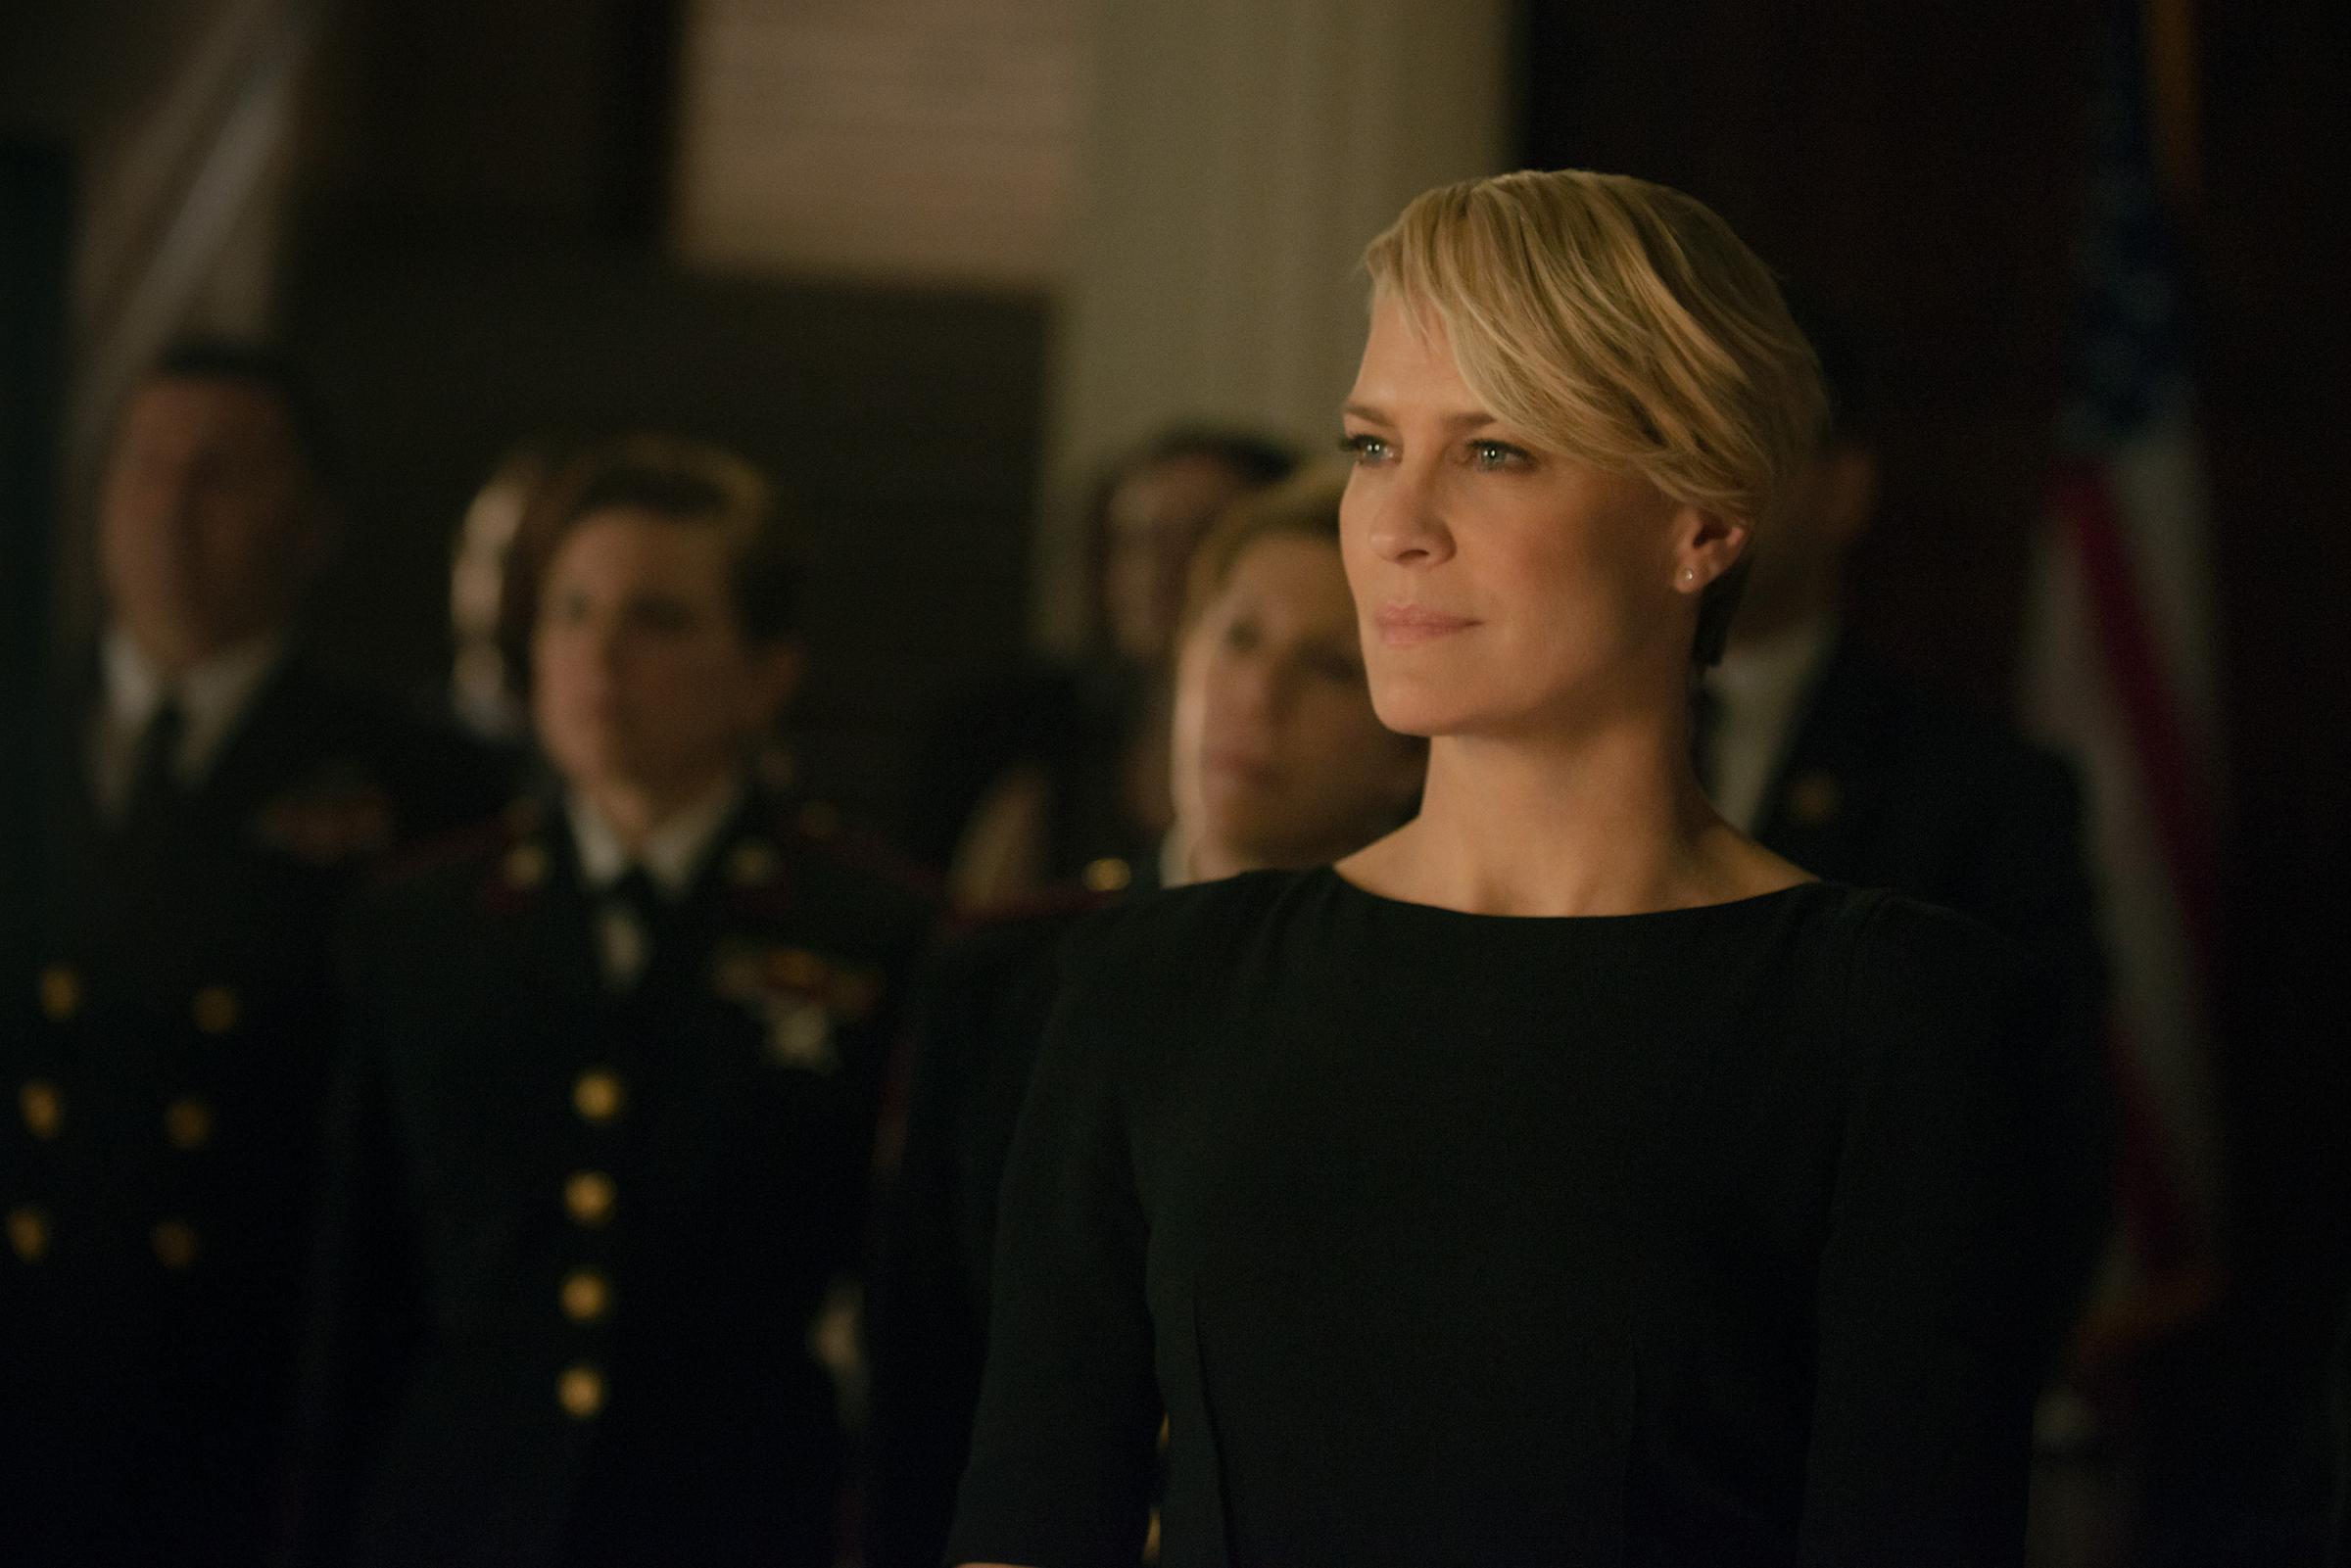 Robin Wright in season 2 of Netflix's "House of Cards." Photo credit: Nathaniel Bell for Netflix.